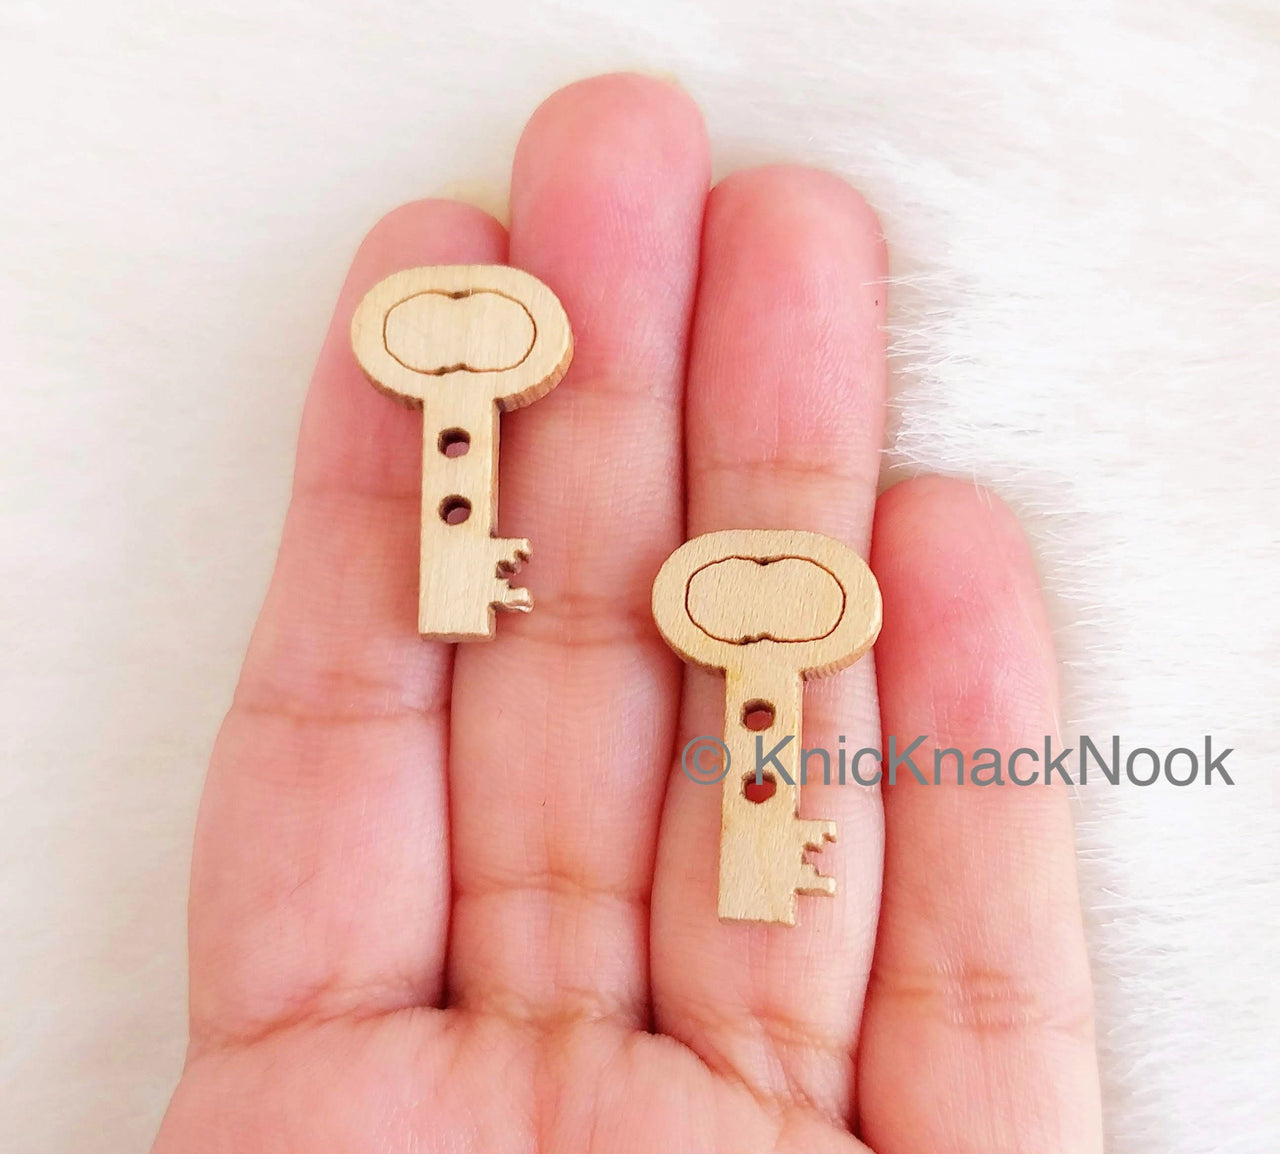 Wood Key Buttons